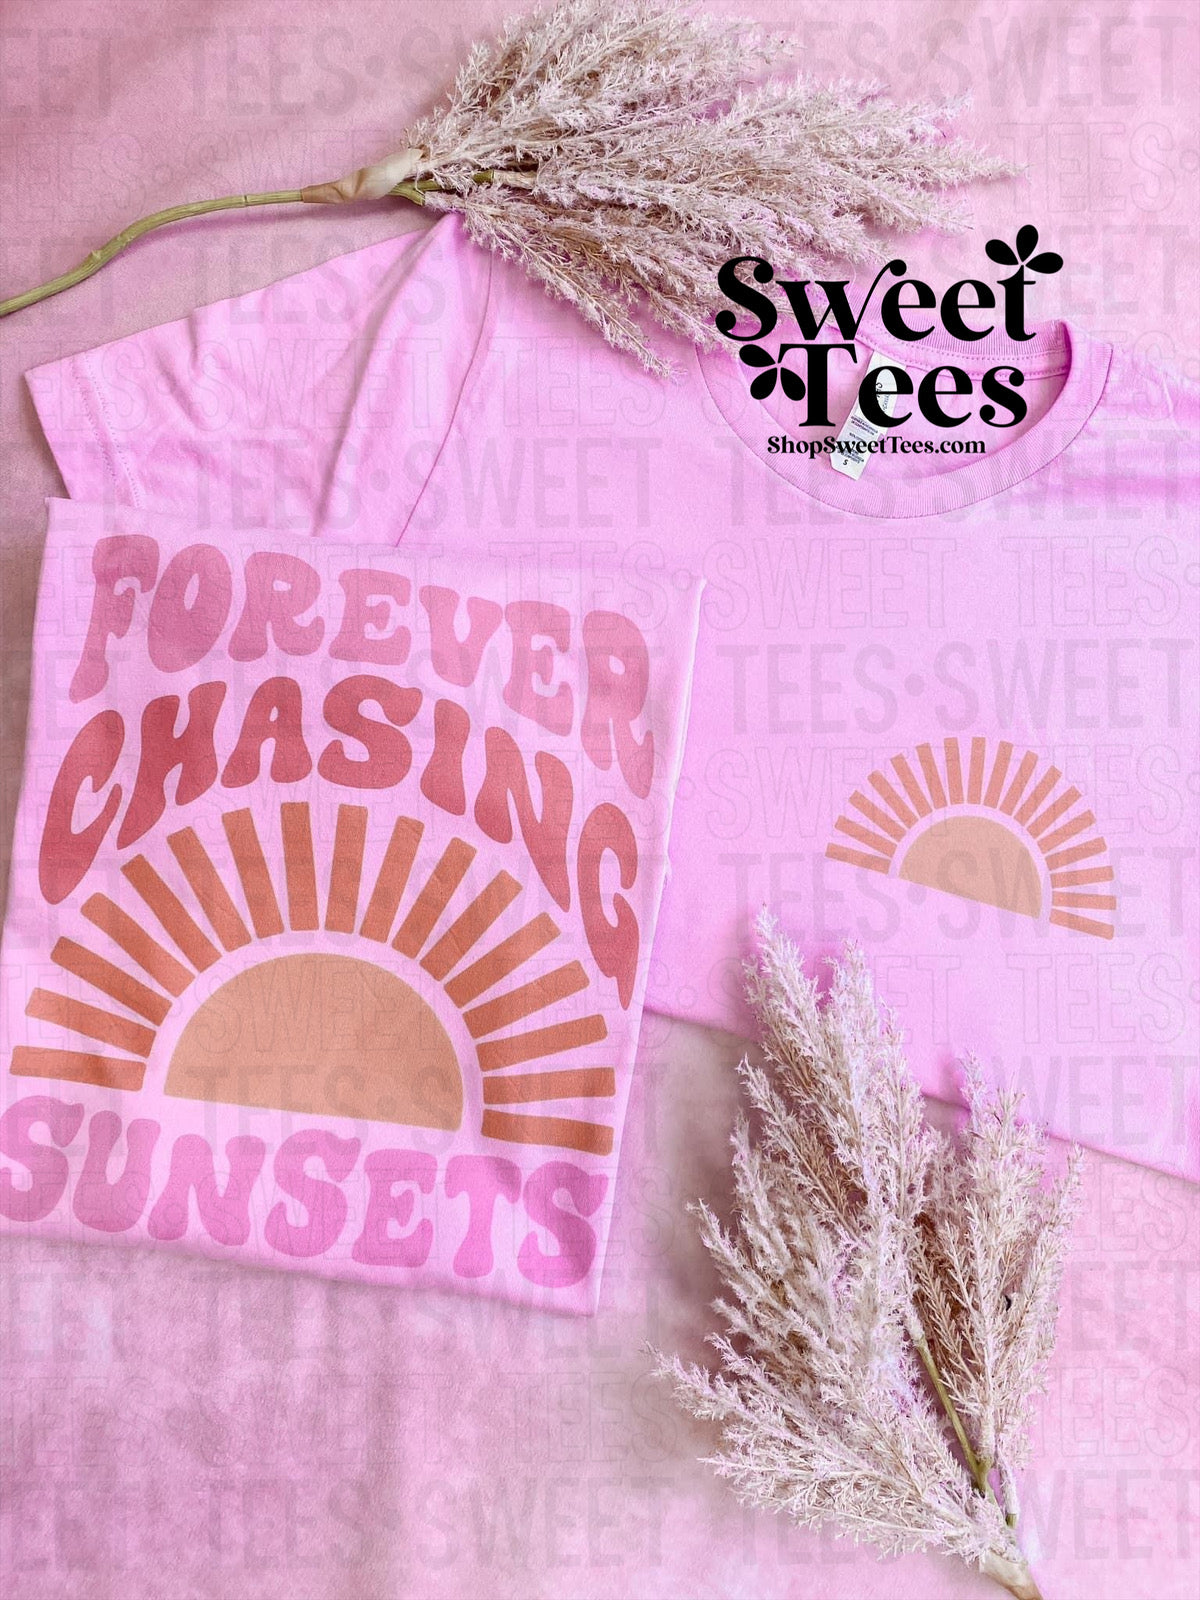 Forever Chasing Sunsets tee